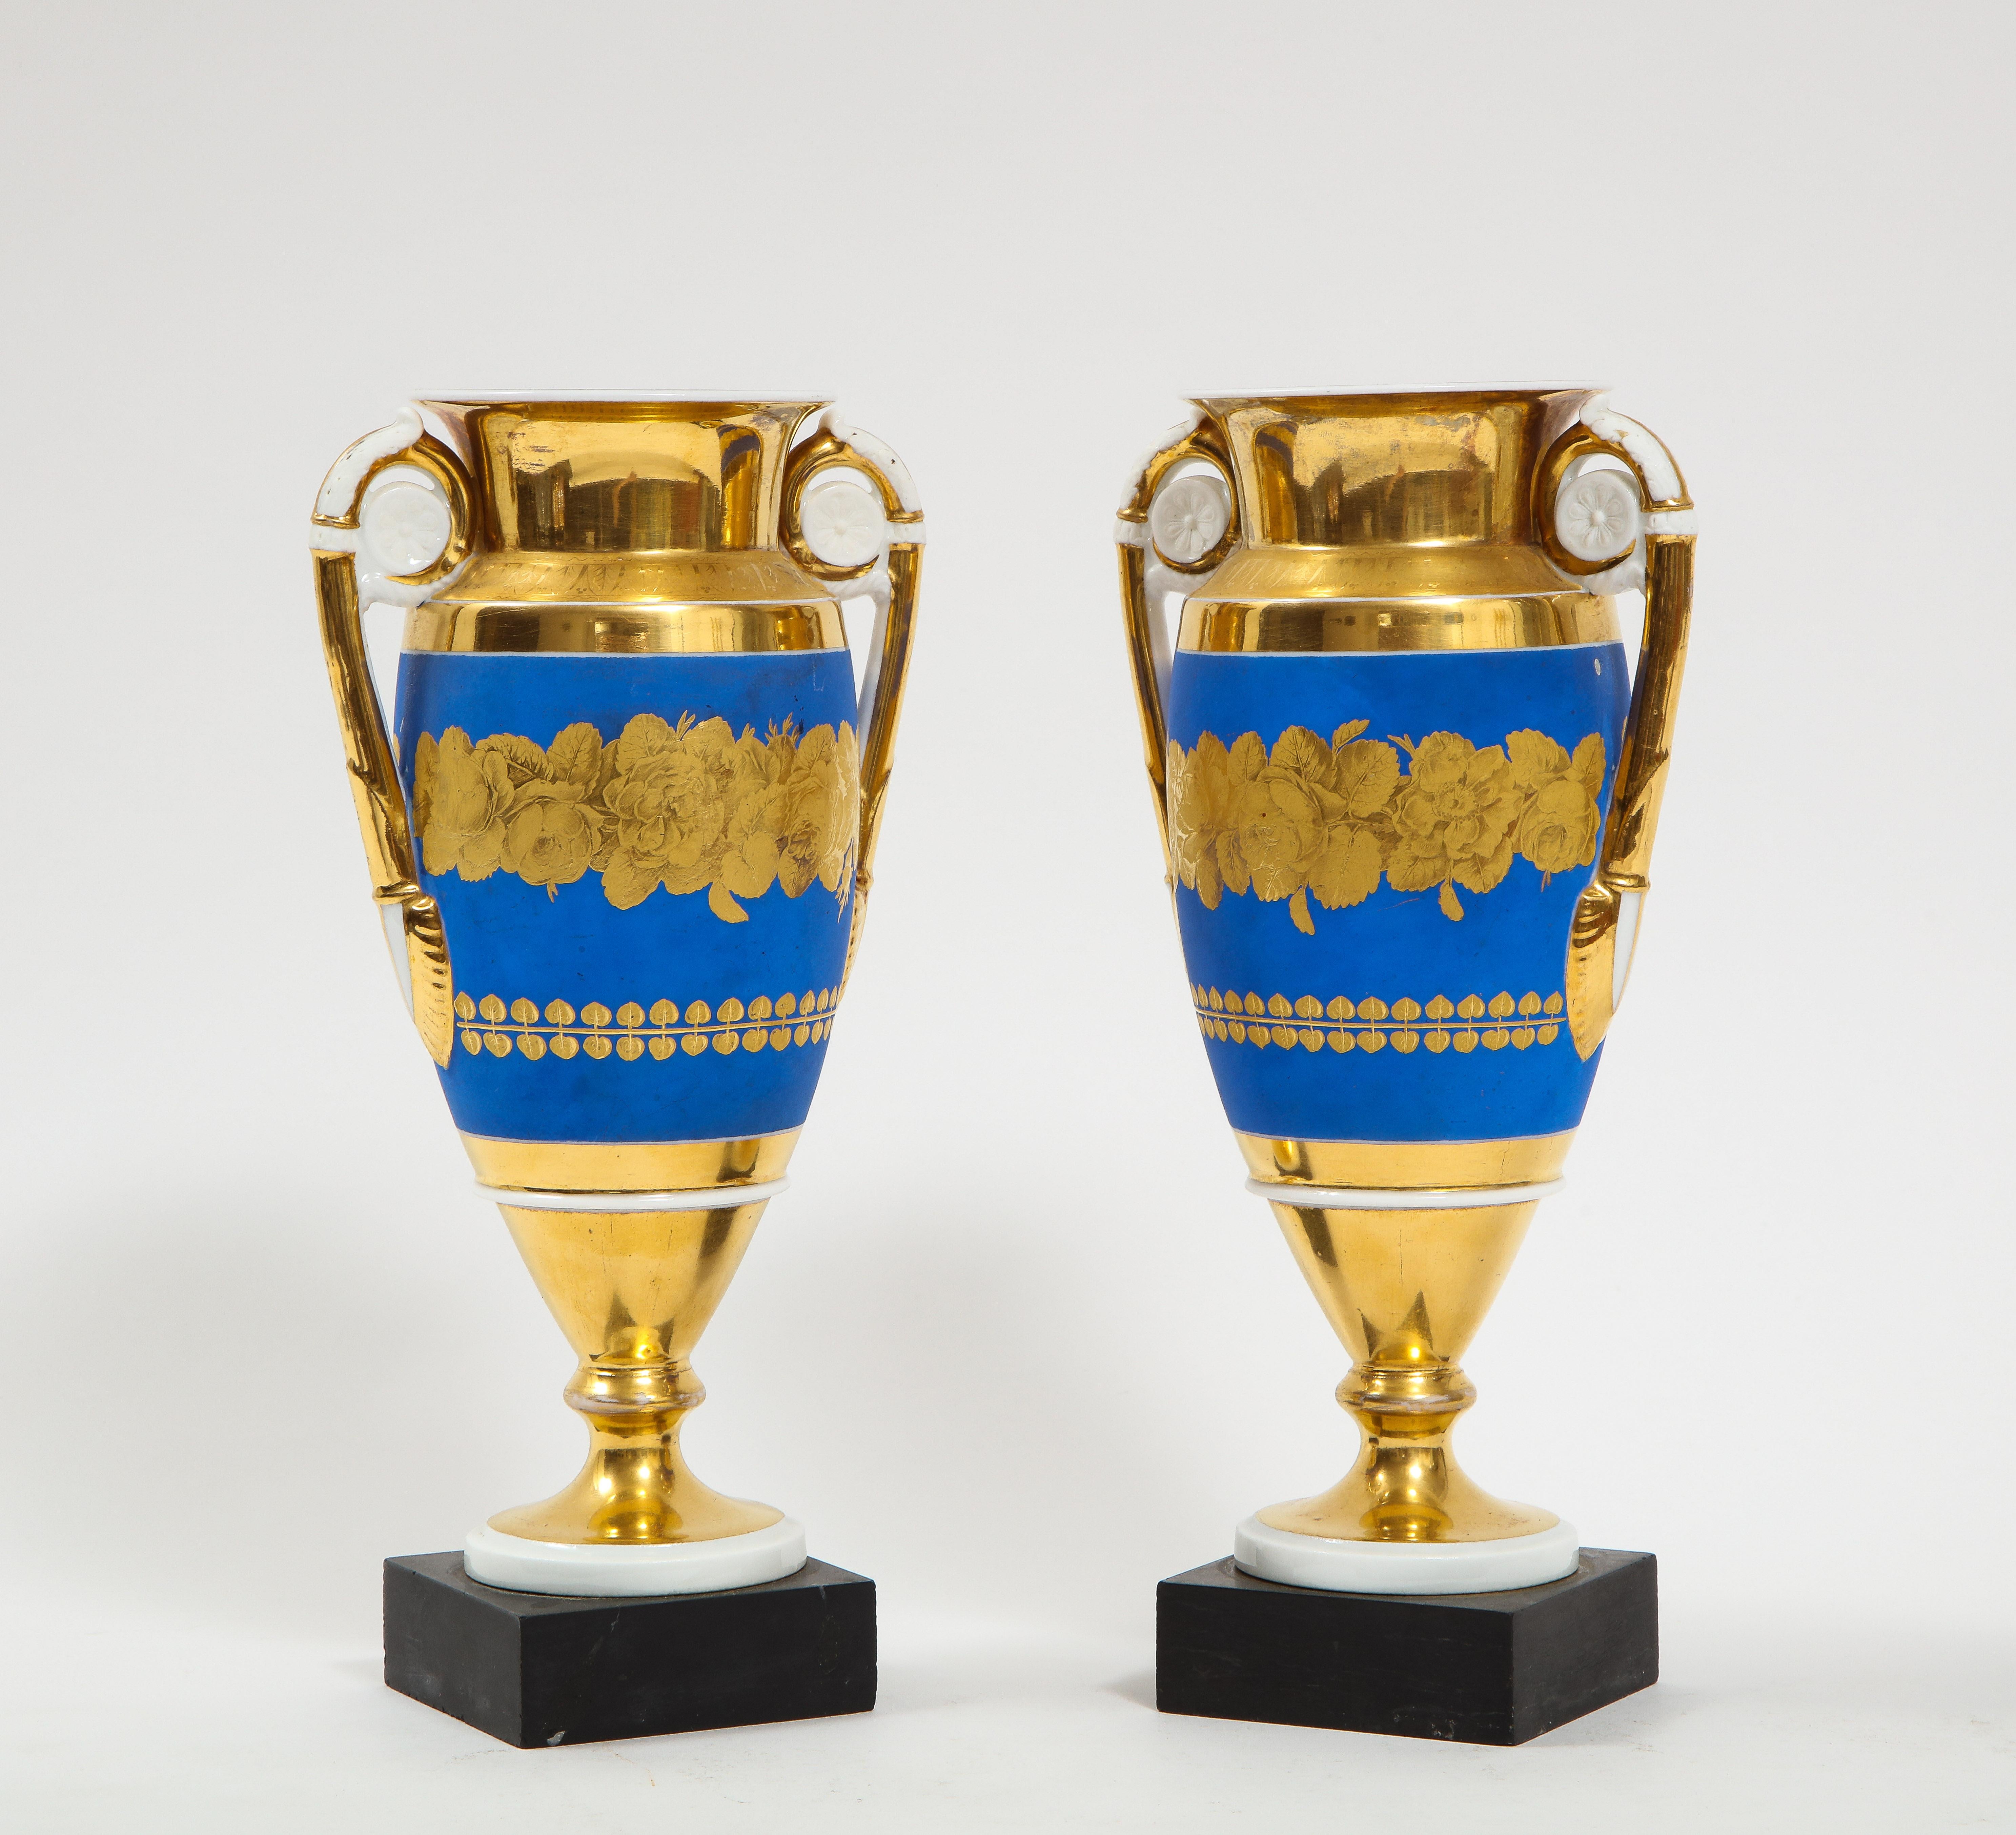 A Beautiful Pair of French 19th Century Empire Blue and Two-Tone Gold Ground Porcelain vases with White Medallion Gold Handles. Each piece is beautifully hand-painted with gorgeous light blue ground as well as two-tone matte and shiny gold flowers.